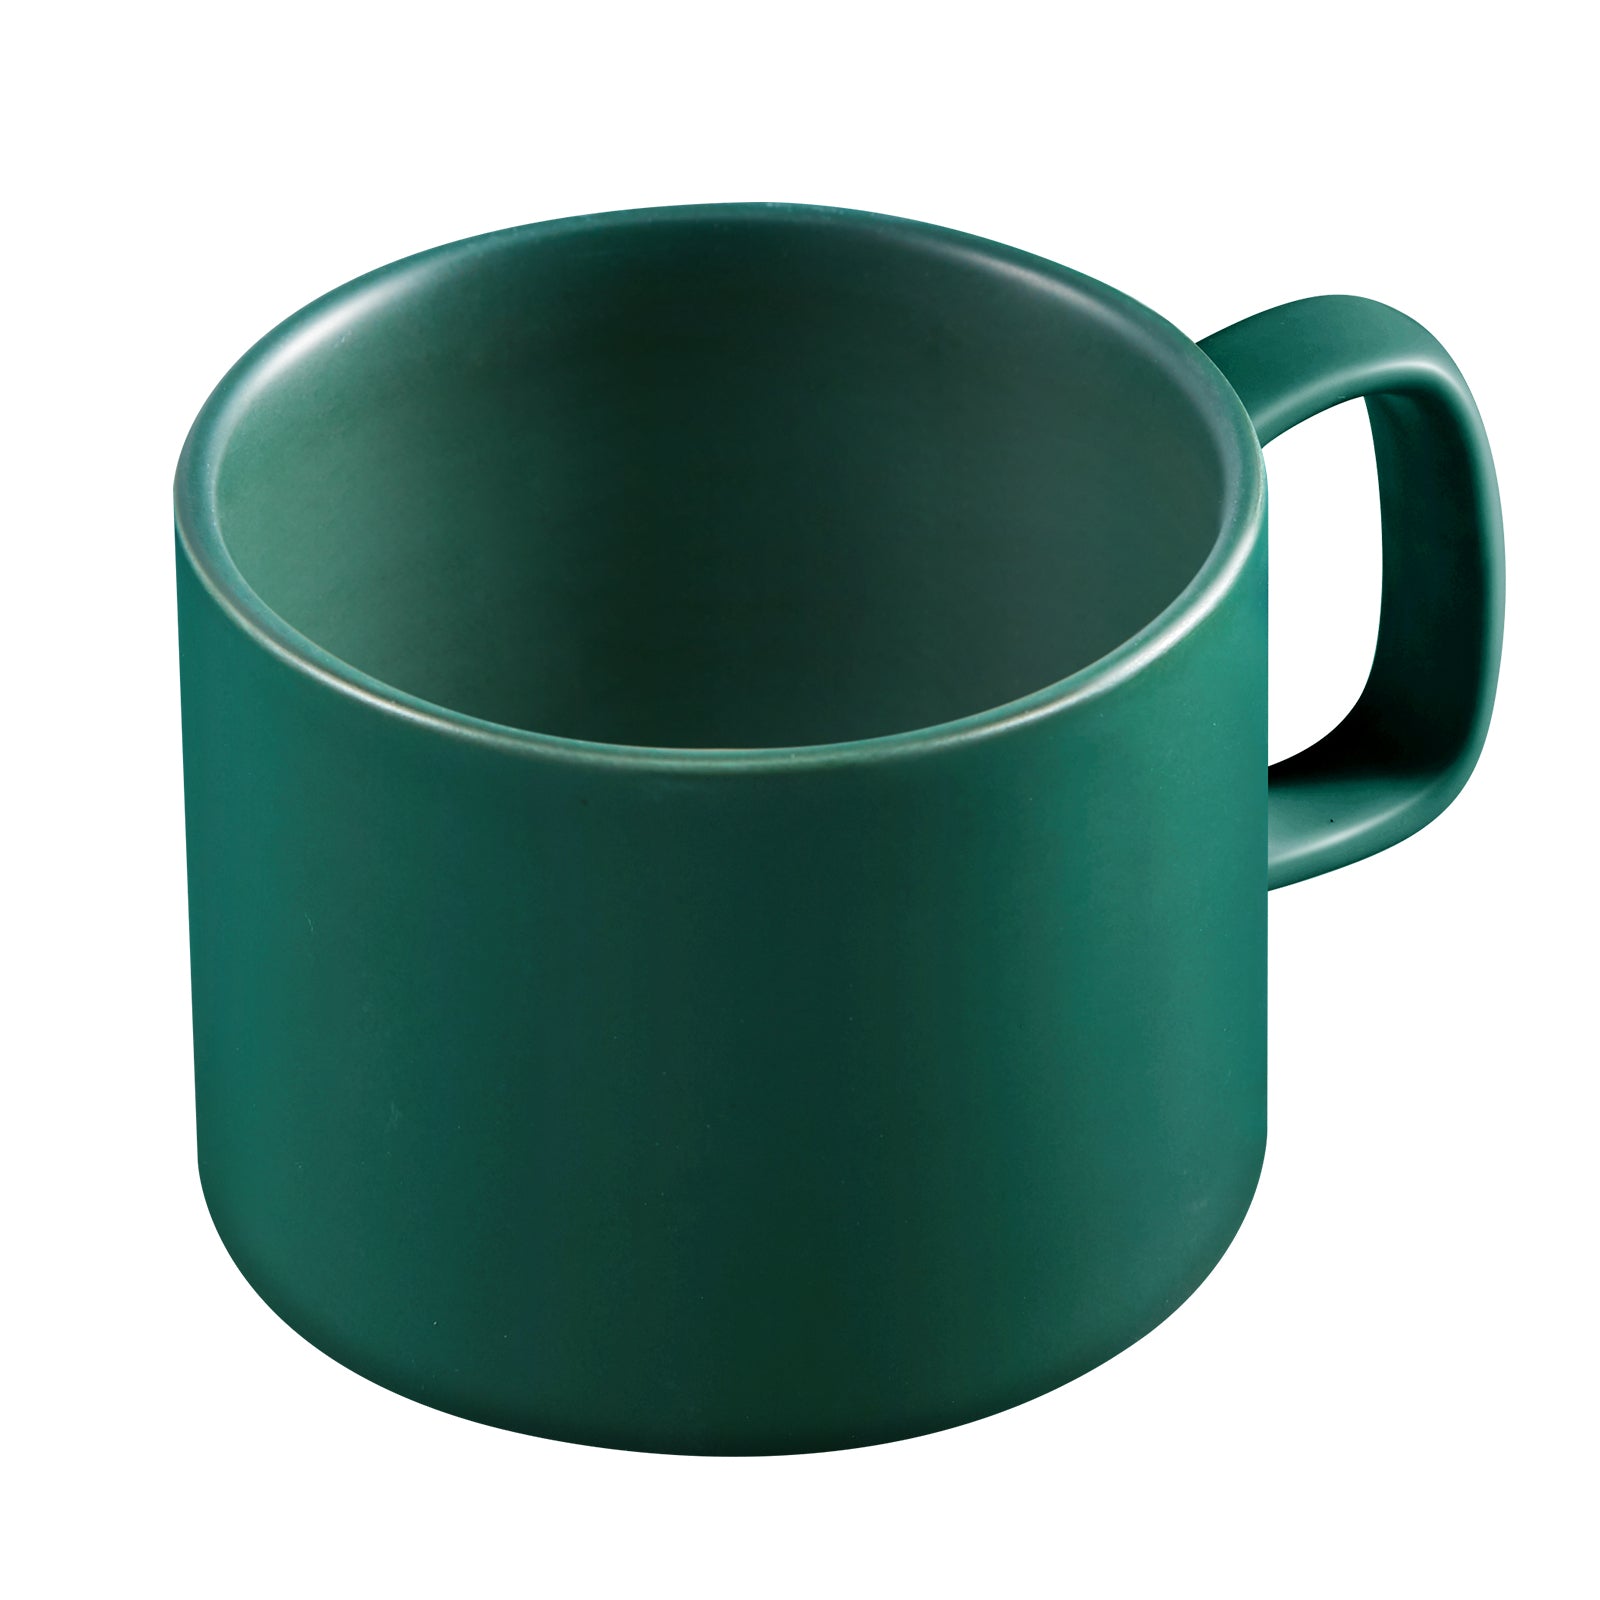 VOBAGA Coffee Mug 11 oz Tea Cup with Flat-Bottom Warming Coffee Milk for Office and Home ( Green)